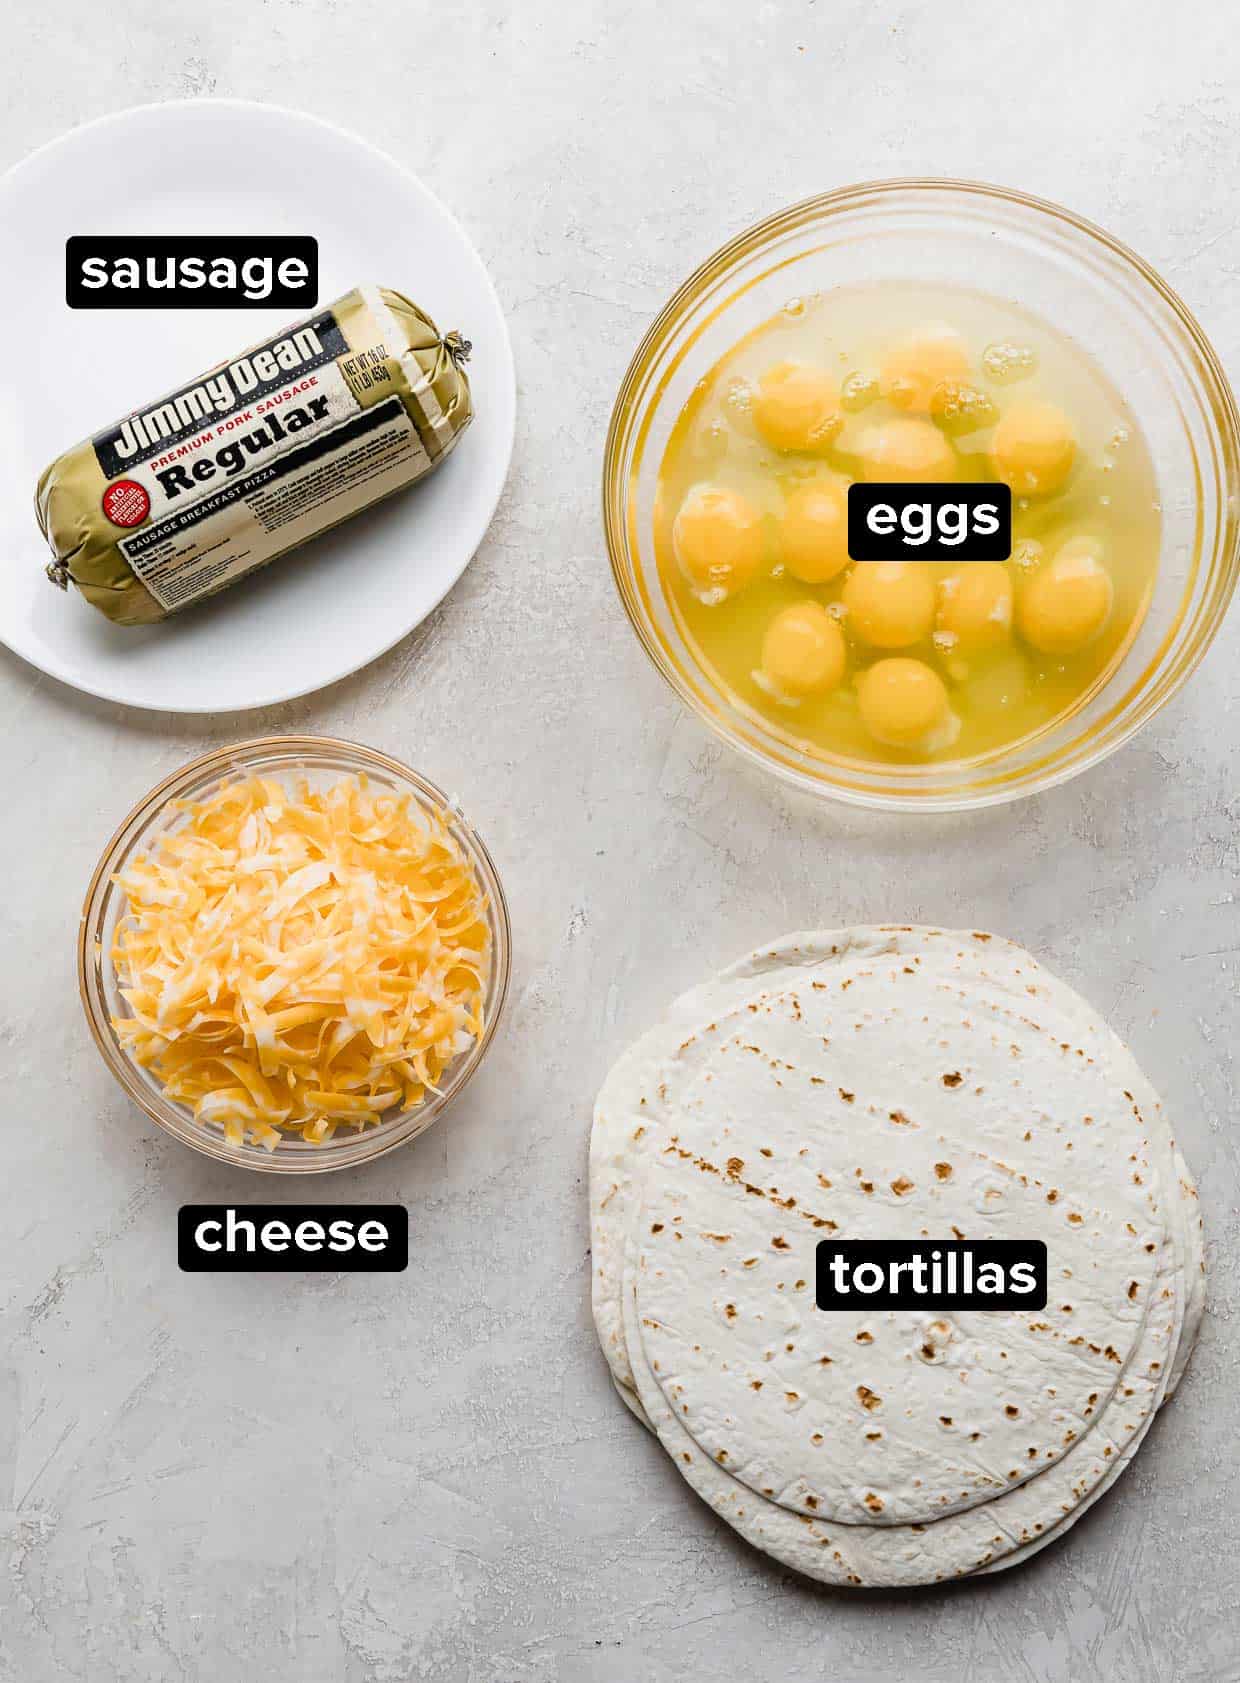 Jimmy Dean sausage, bowl of eggs, cheese, and tortillas on a gray background.